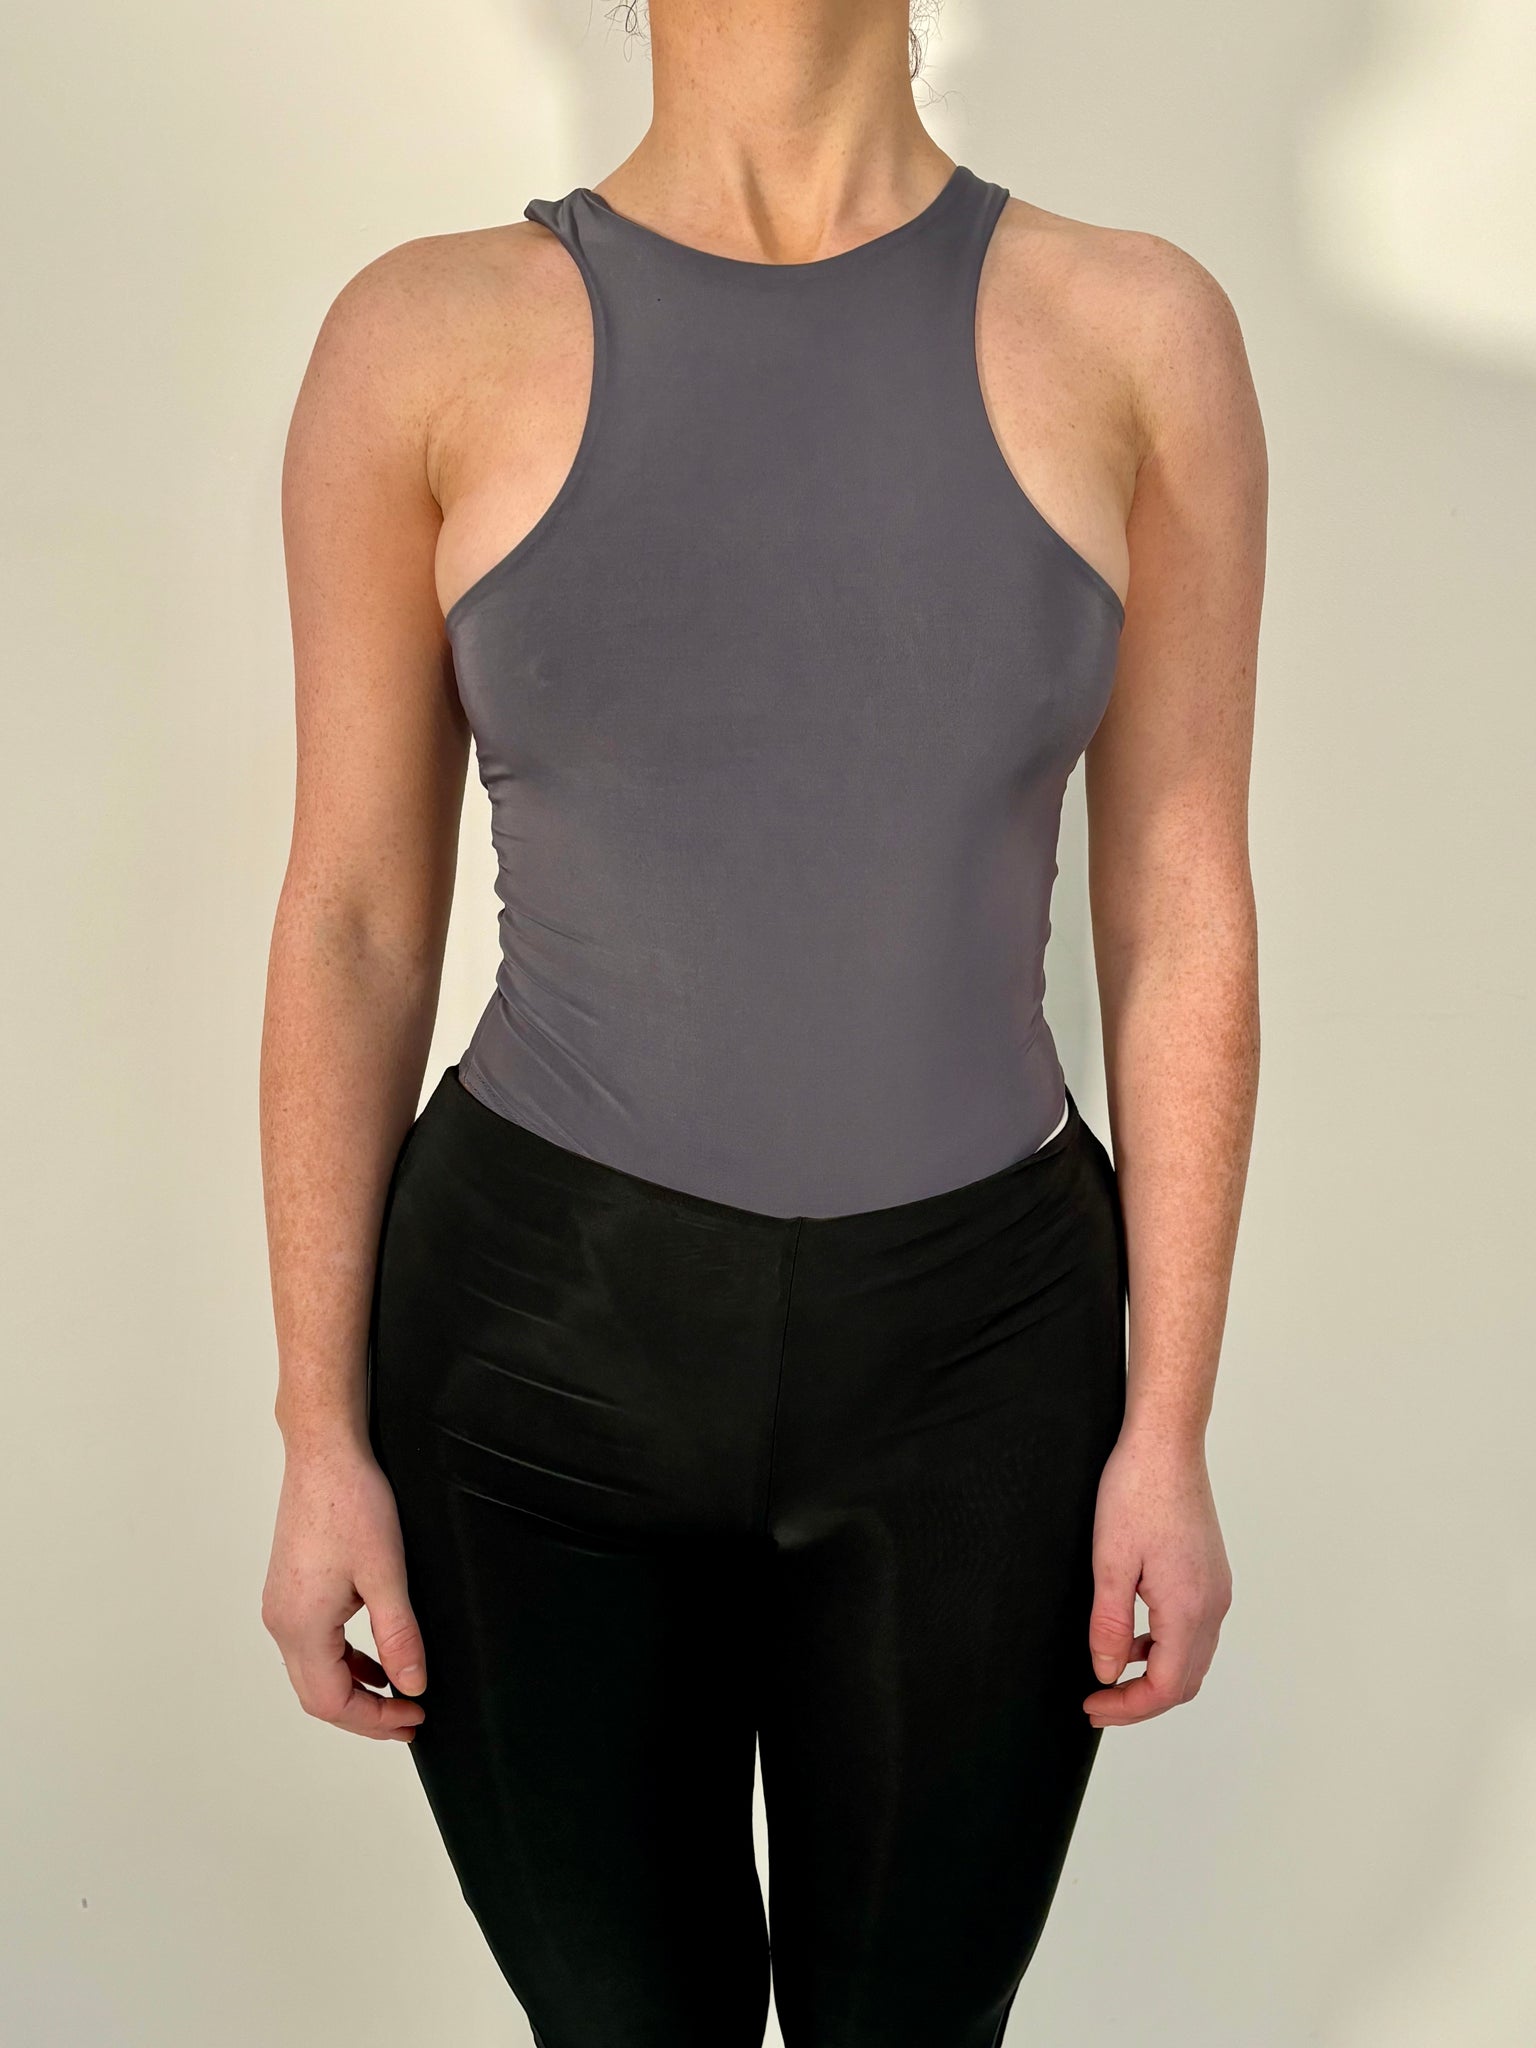 double layer racer neck body CHARCOAL